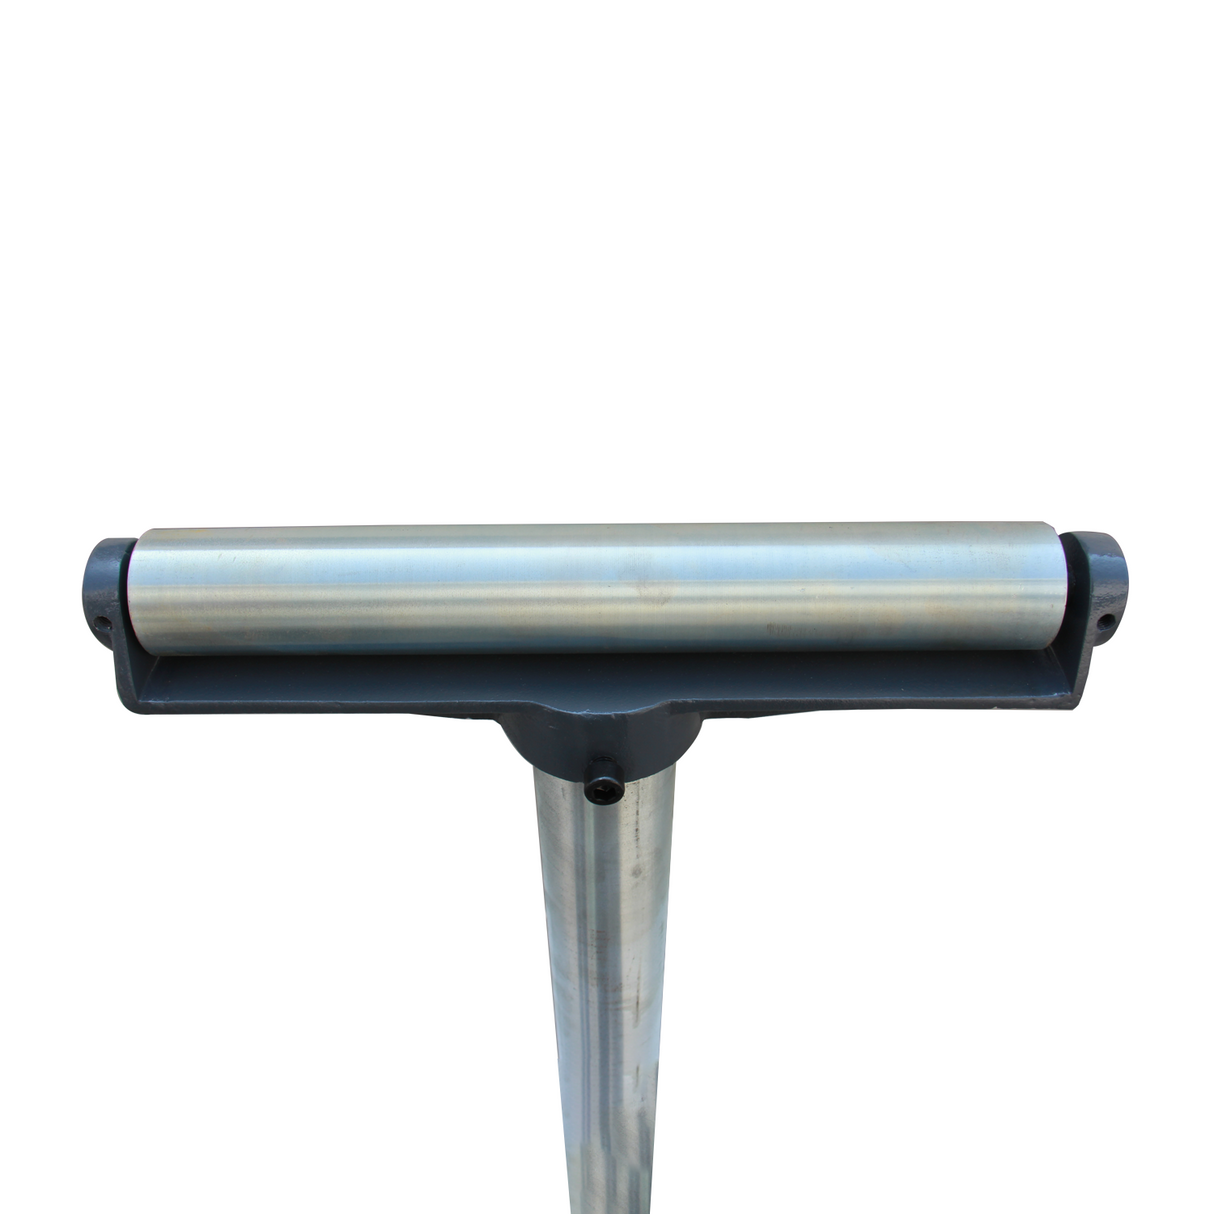 KANG Industrial RB-1100 Stands and Supports, Adjustable 620mm to 1100mm Tall Pedestal Roller Stand with Ball Bearing Roller, 300kg Material Support